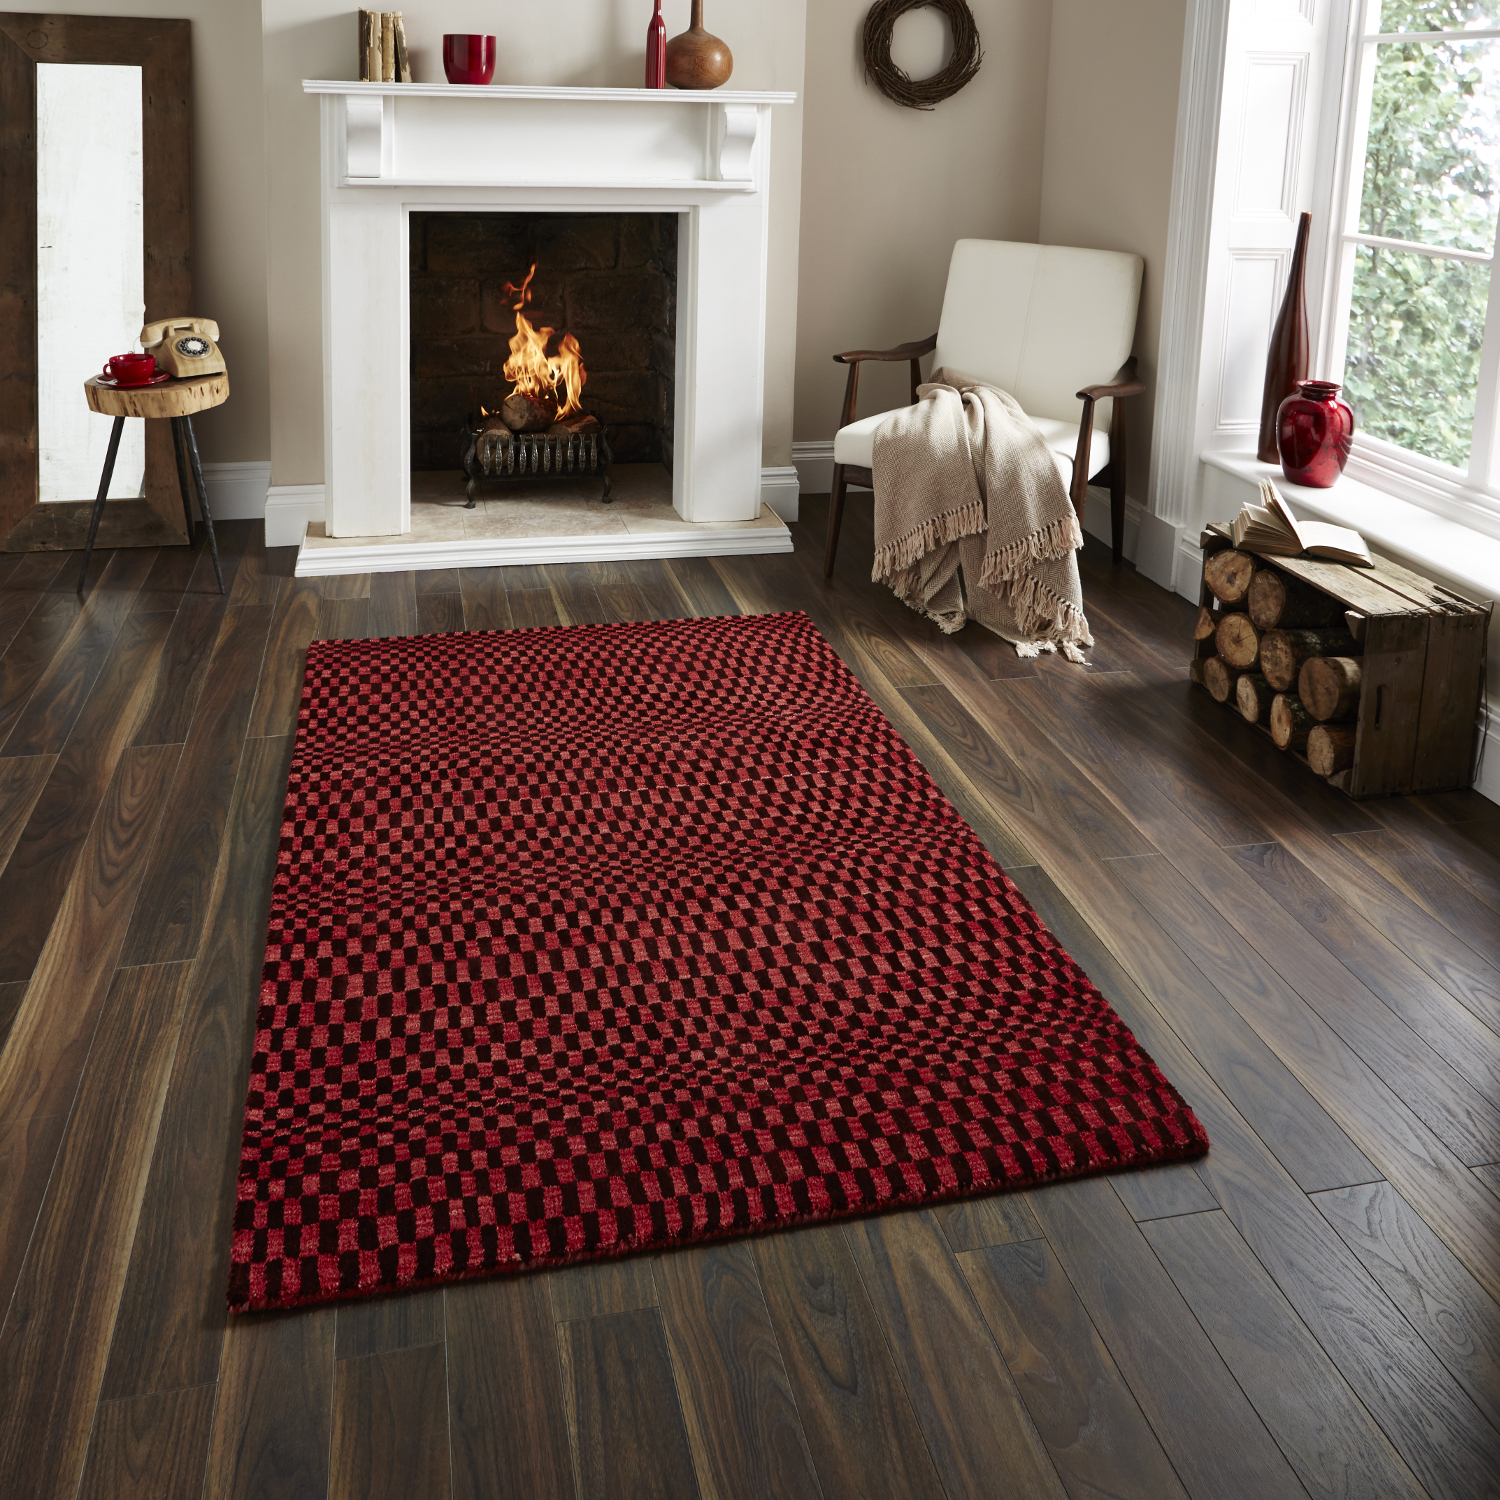 Large floor rugs sonic-wave-effect-optical-illusion-large-floor-mat- QCXWHOL